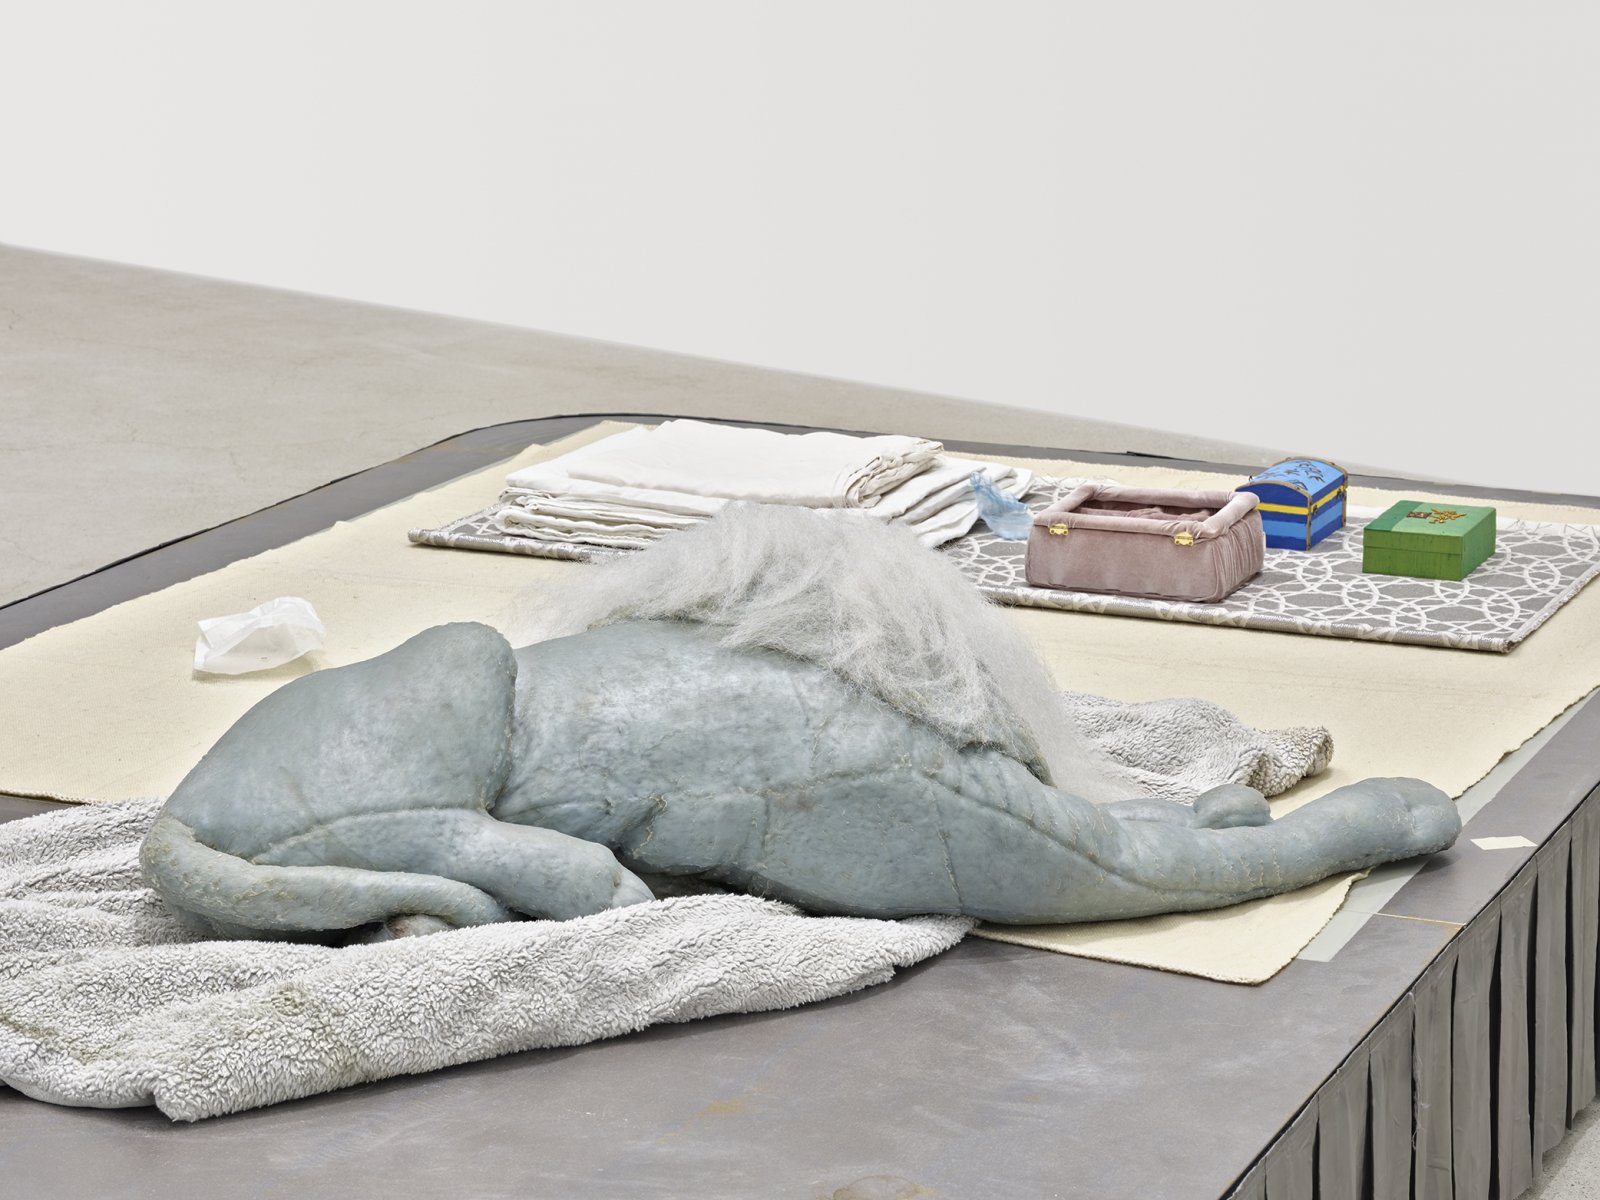 ​​Liz Magor, Coiffed (detail), 2020, painted plywood, fabric skirting, silicone rubber, artificial hair, acrylic throw, woollen blankets, silver fabric, linen, jewellery boxes, costume jewellery, packaging materials, 27 x 132 x 96 in. (69 x 335 x 244 cm)​ by Liz Magor